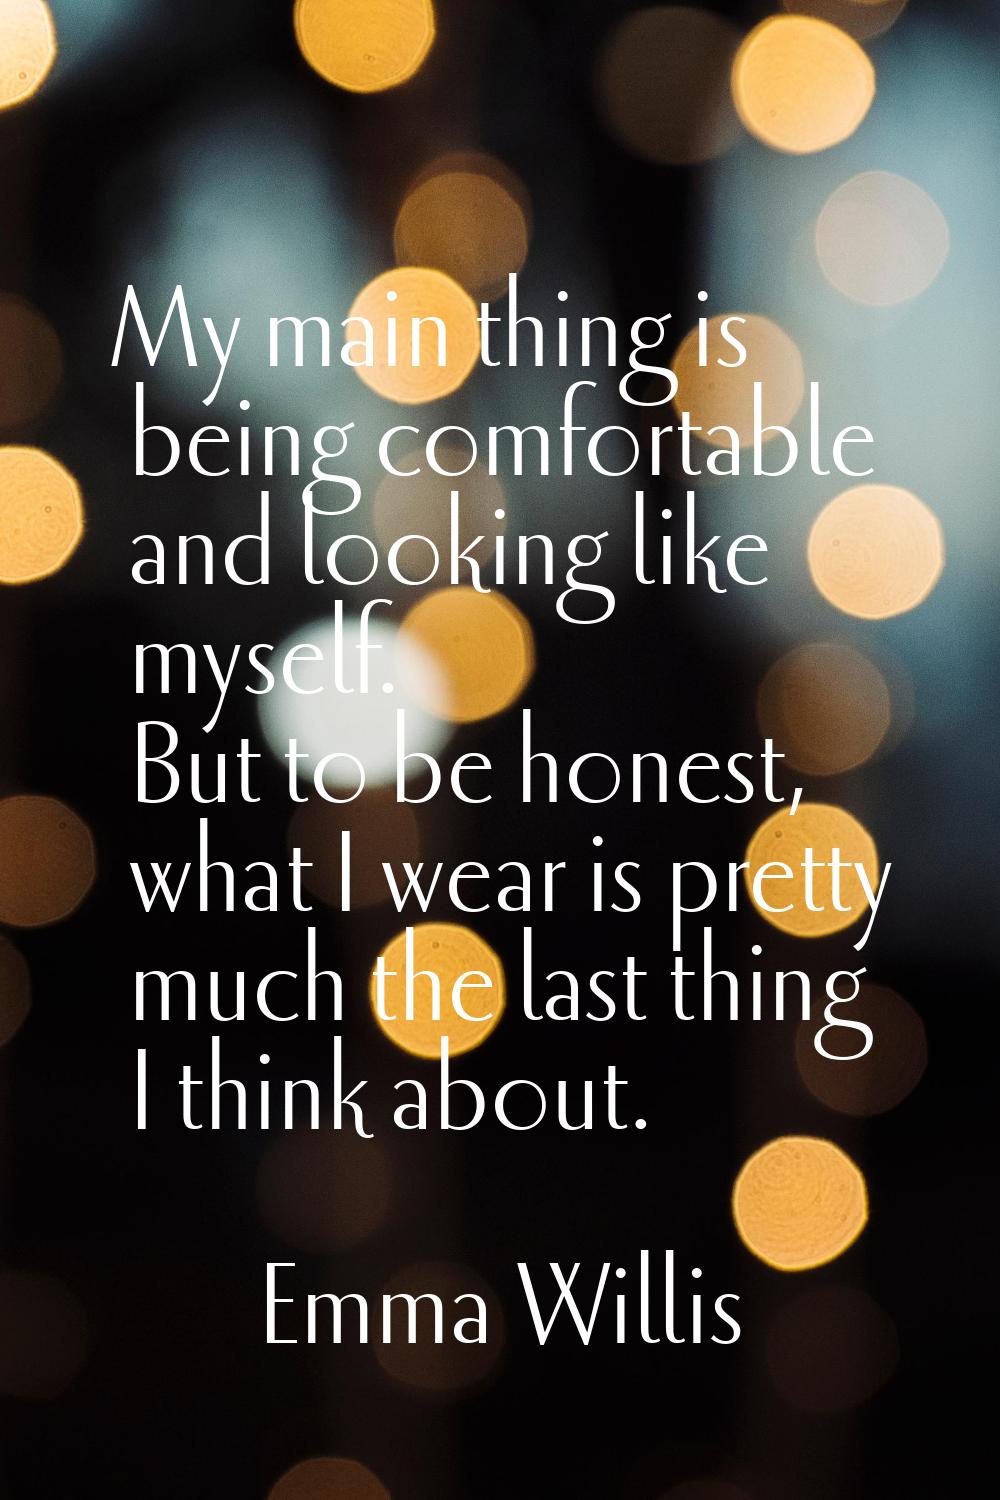 My main thing is being comfortable and looking like myself. But to be honest, what I wear is pretty